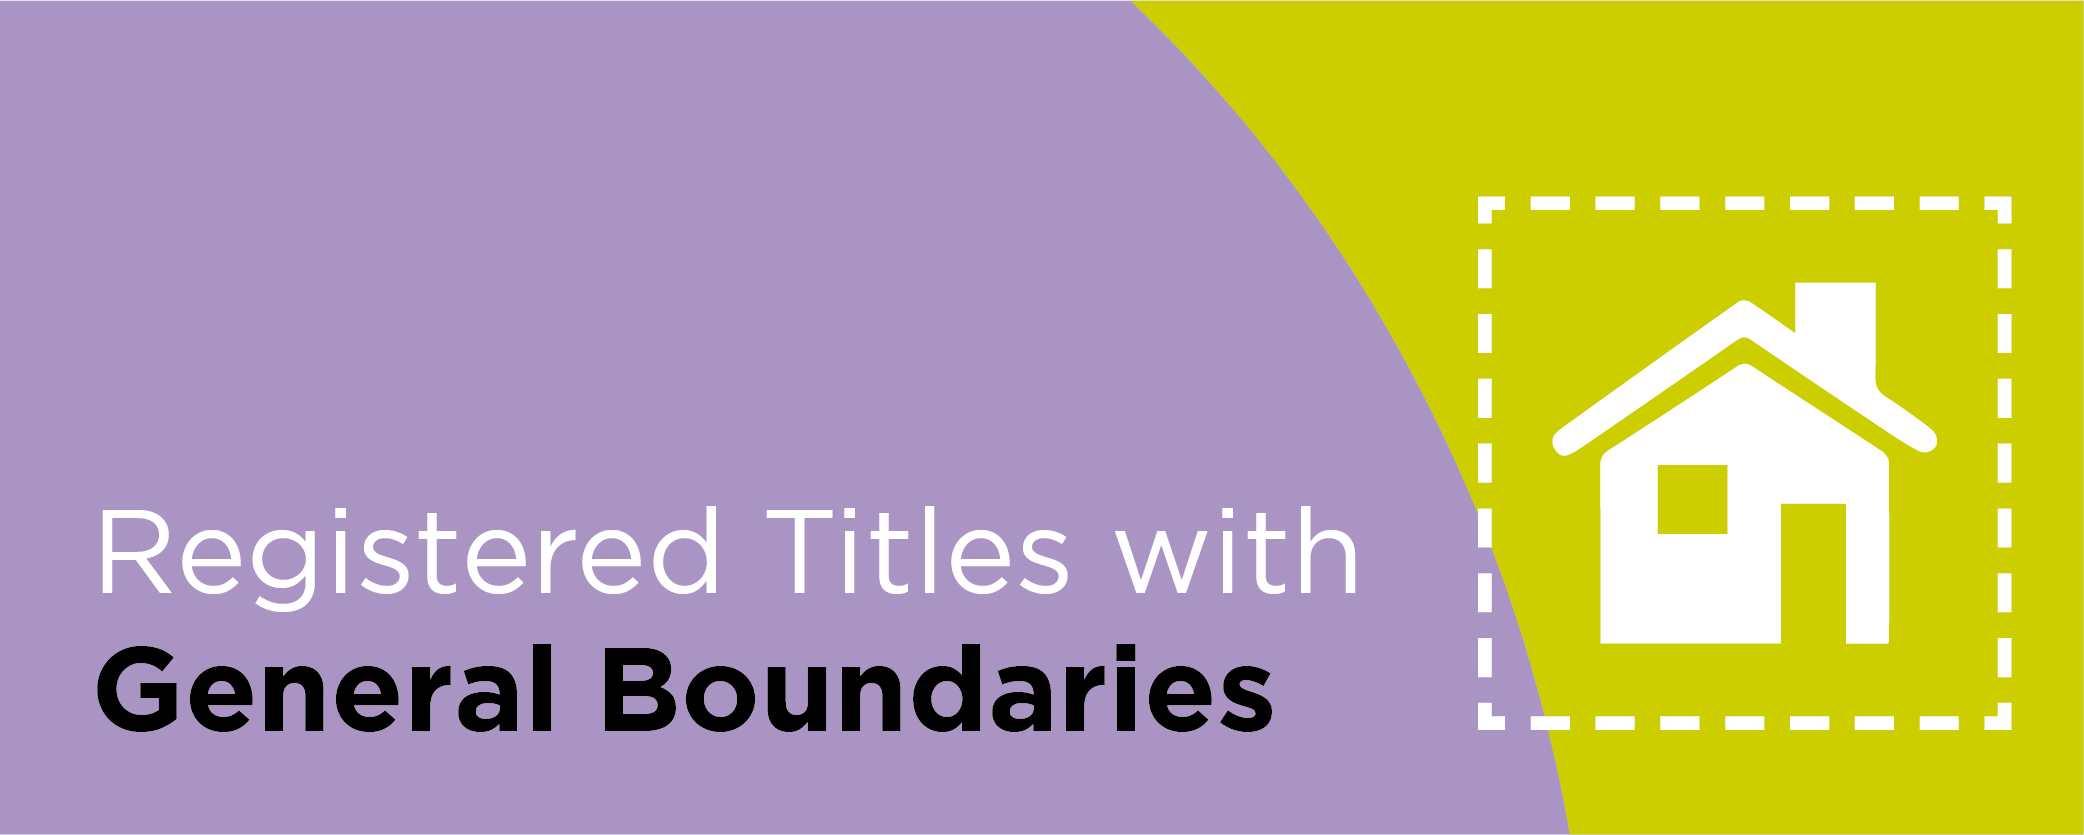 Registered Titles with General Boundaries